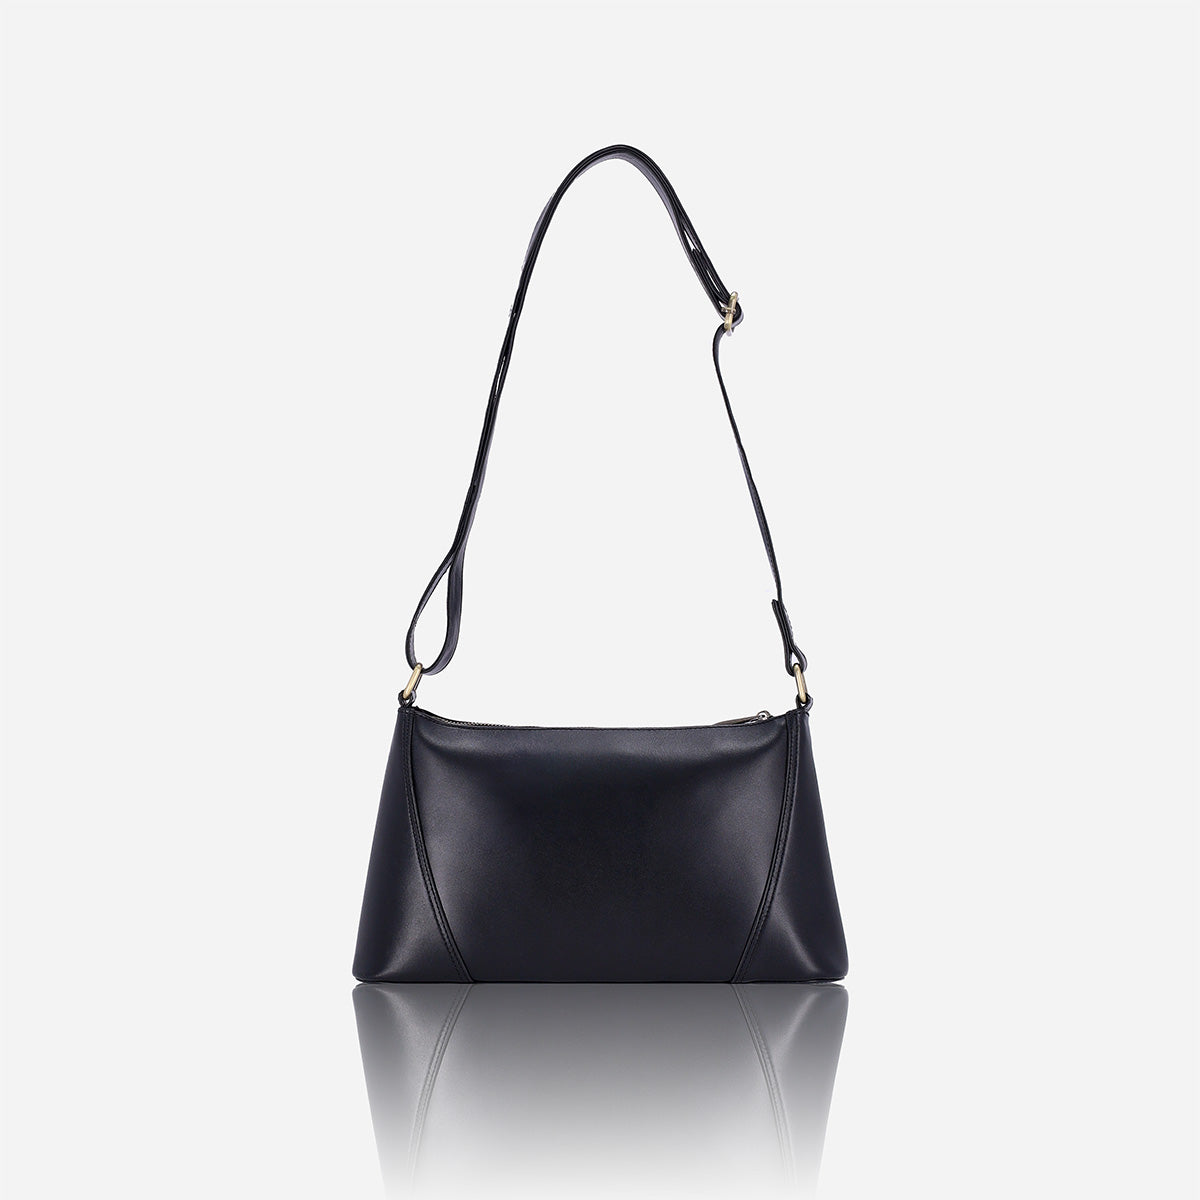 Carry-All Black Leather Bag